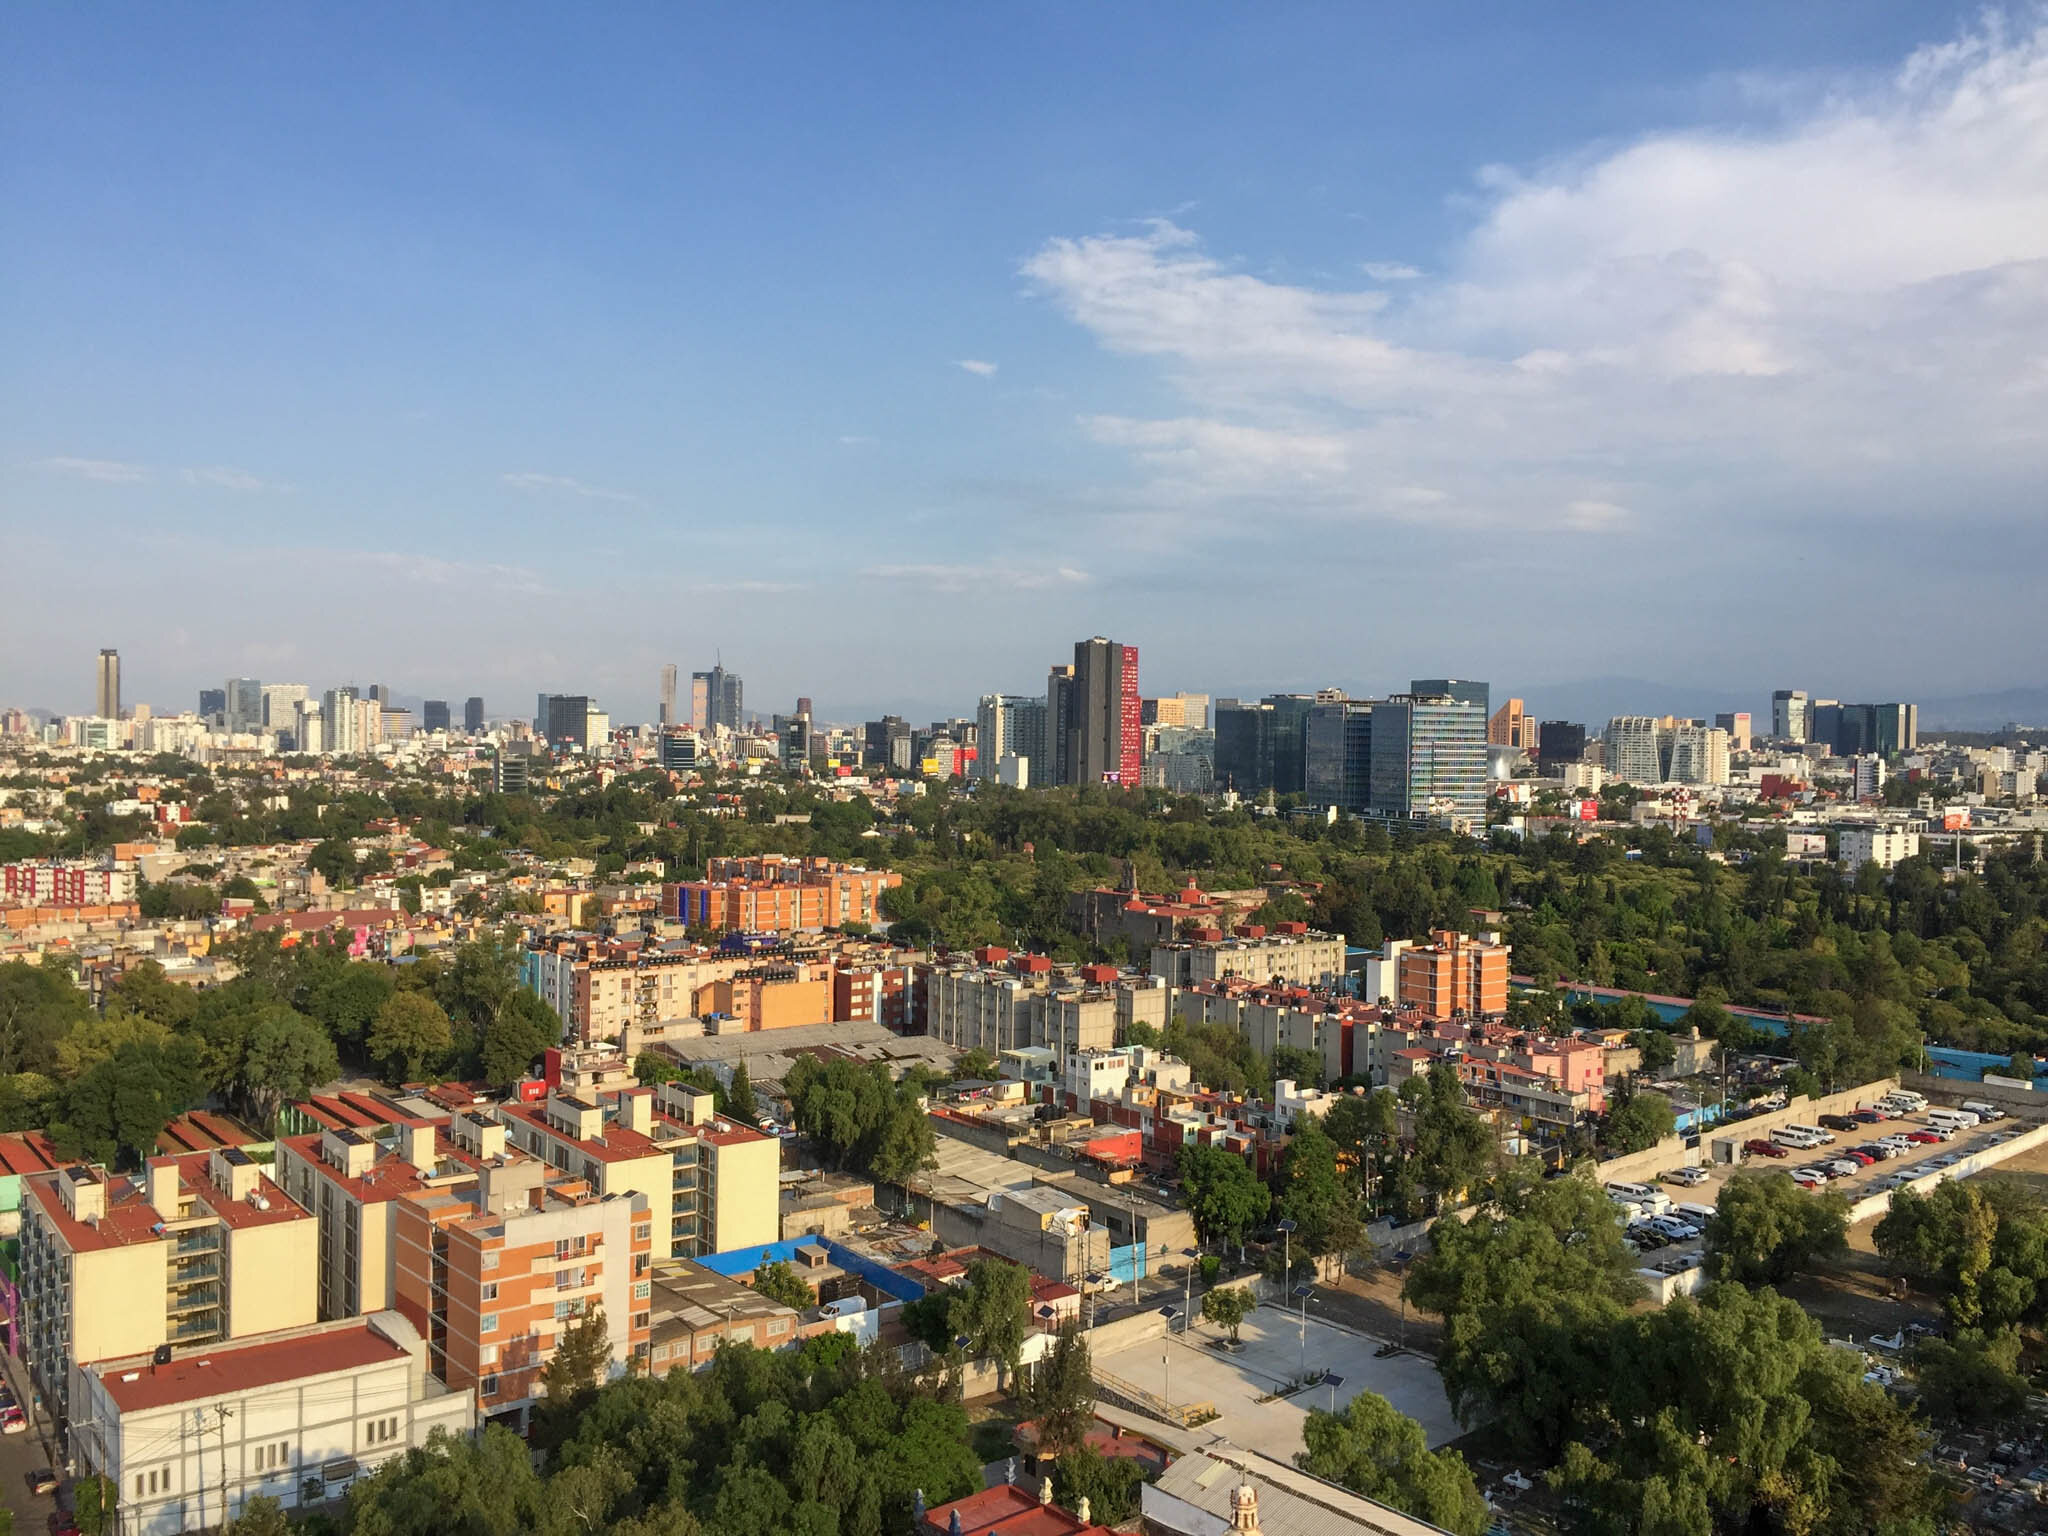 Rooftop views of sprawling Mexico City